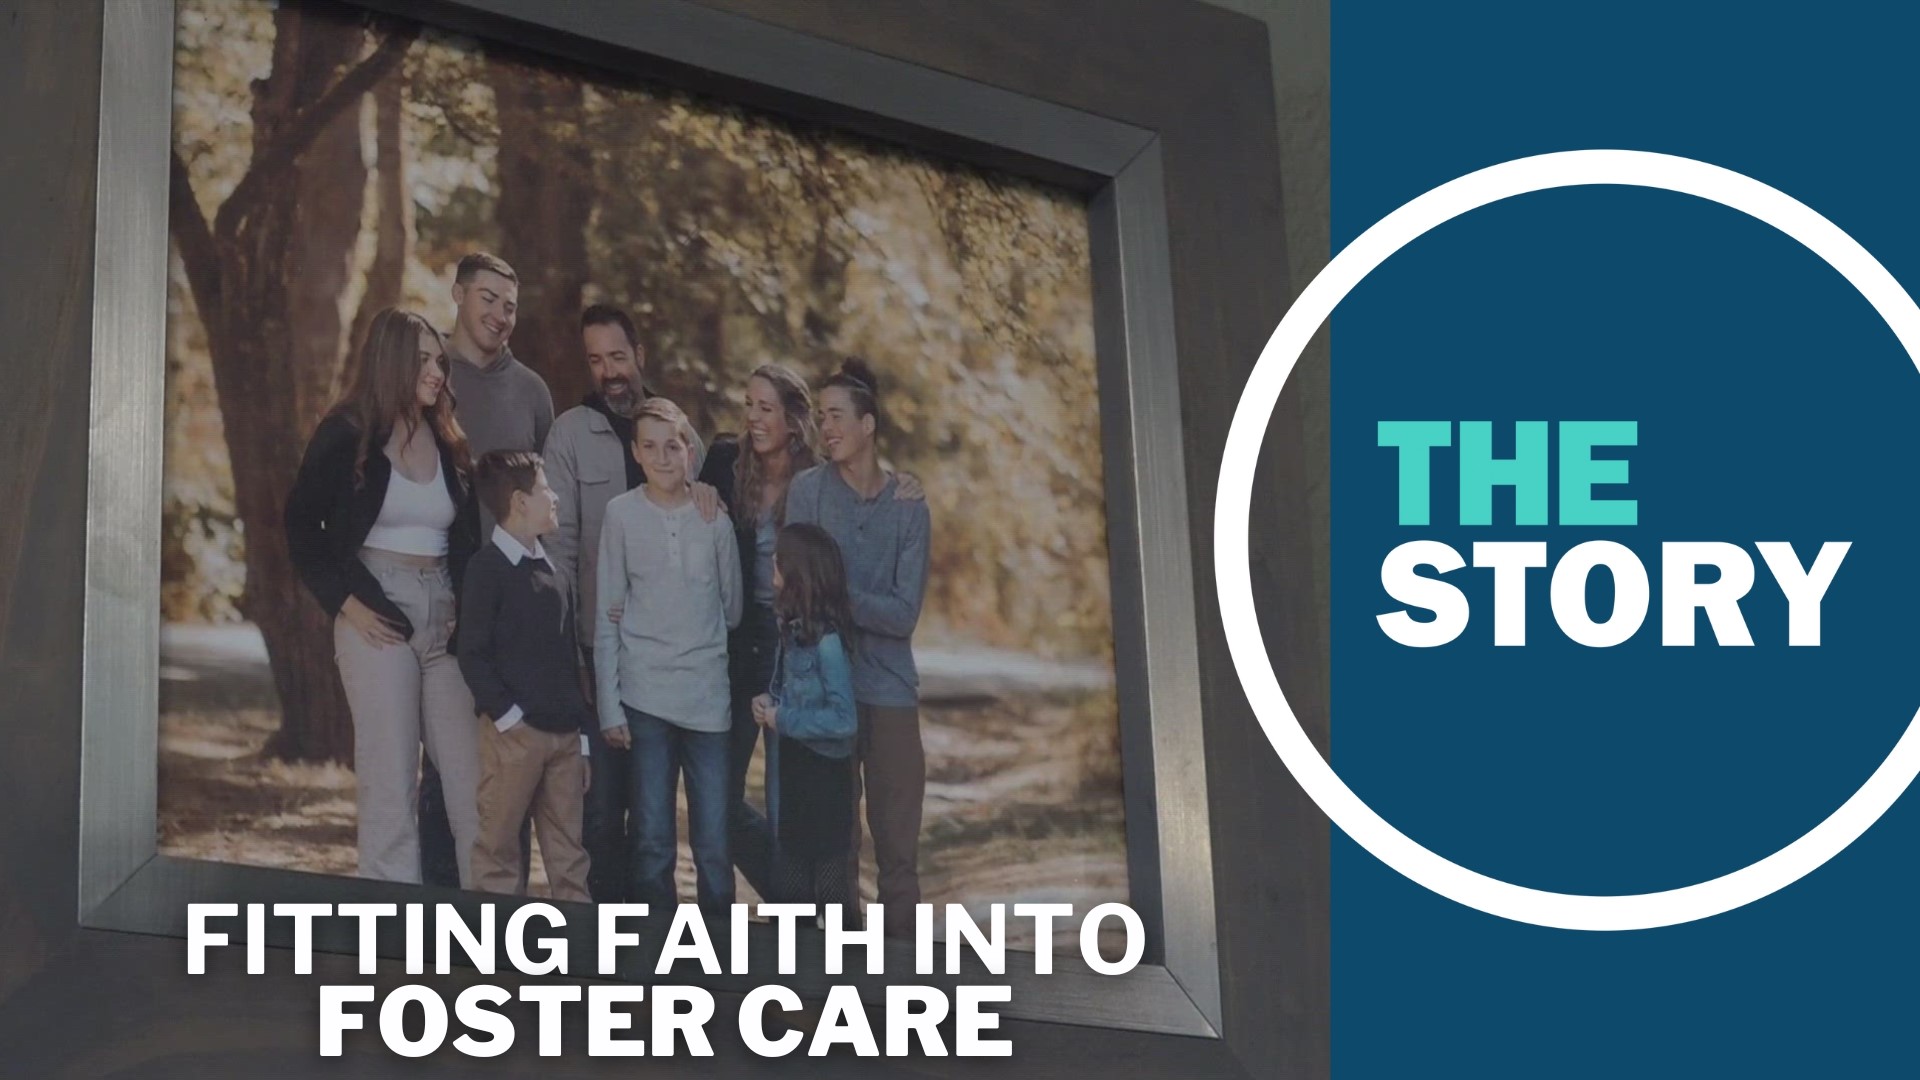 Despite their religious convictions, Jeremy and Kristina Thom don't feel that Oregon rules around LGBTQ+ foster kids bar them from creating a loving foster home.